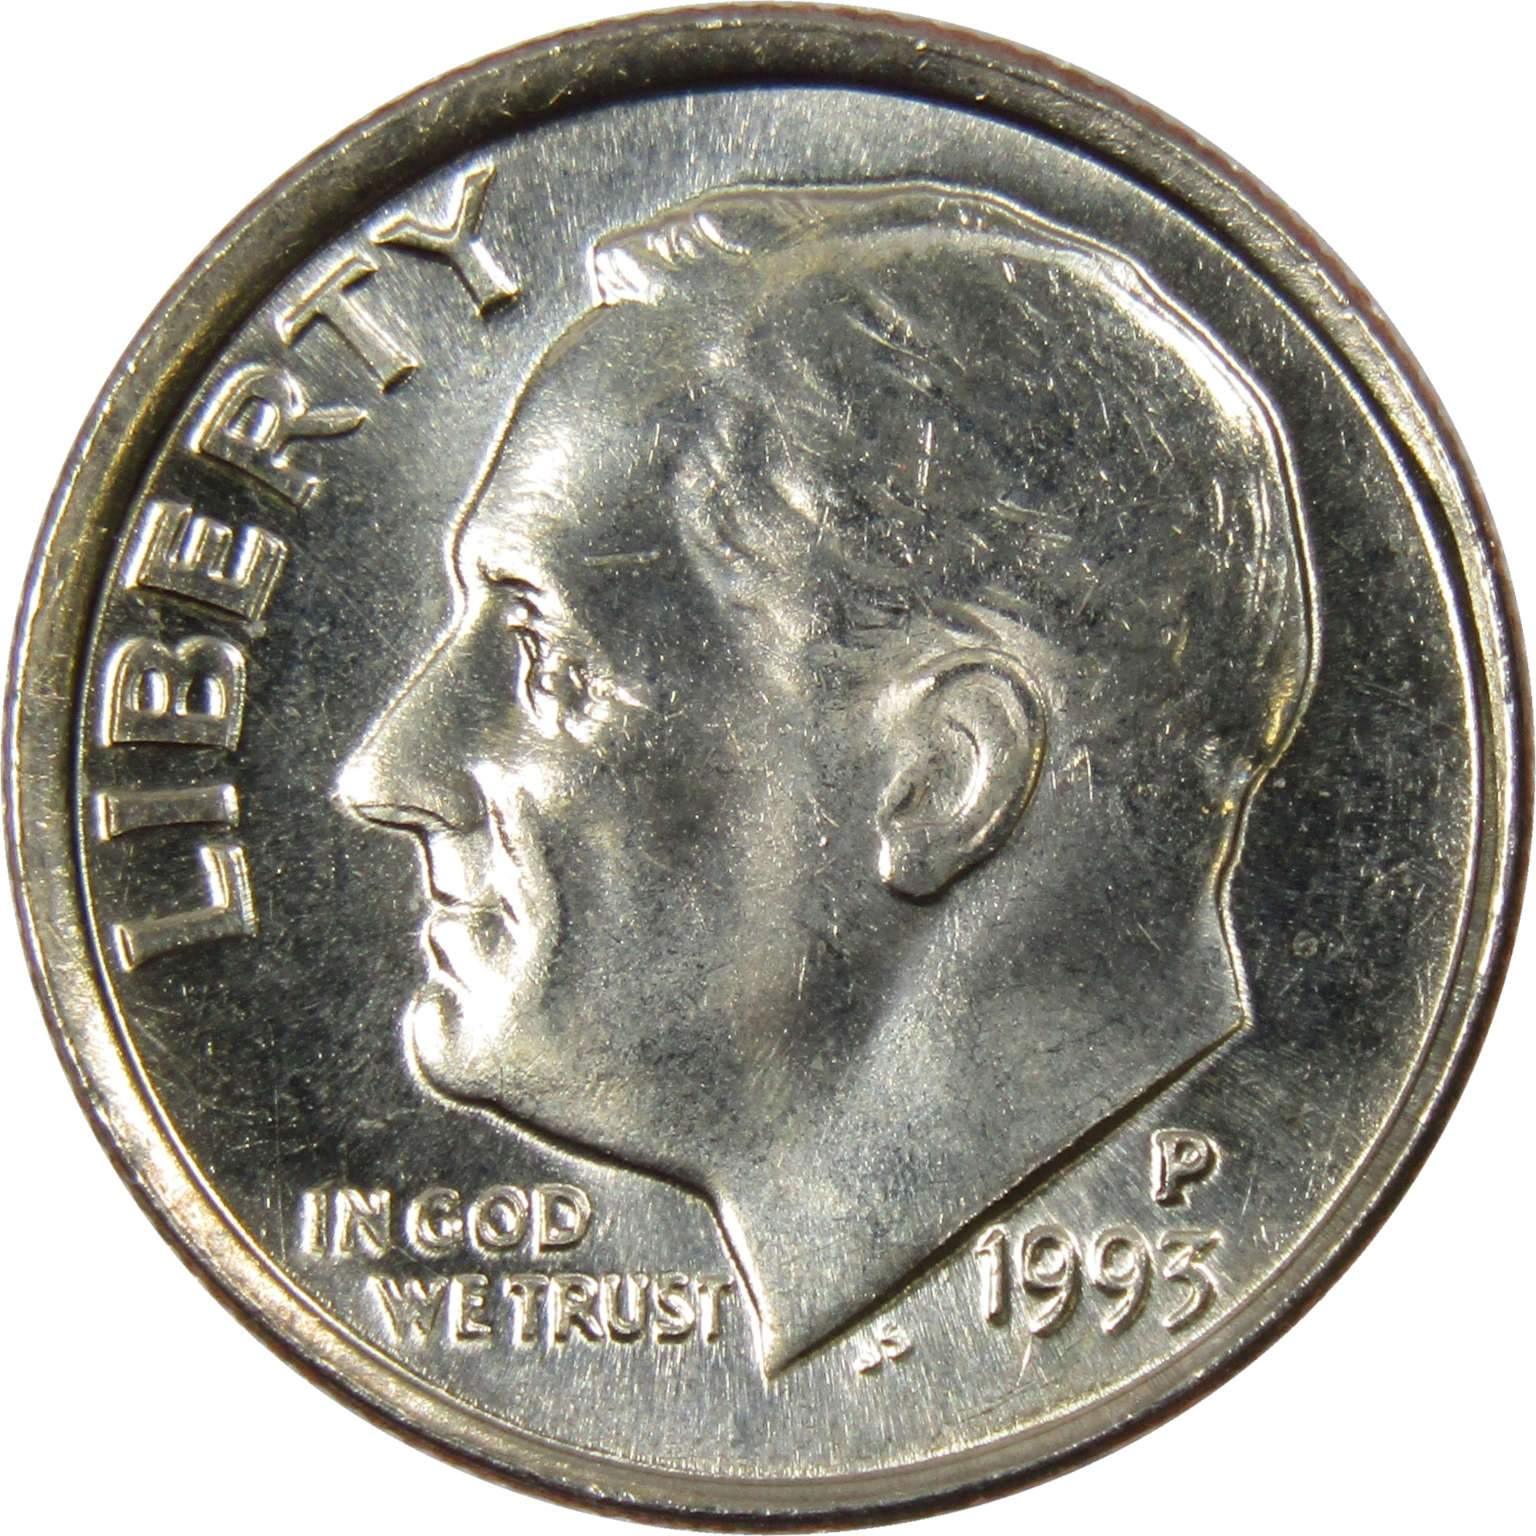 1993 P Roosevelt Dime BU Uncirculated Mint State 10c US Coin Collectible